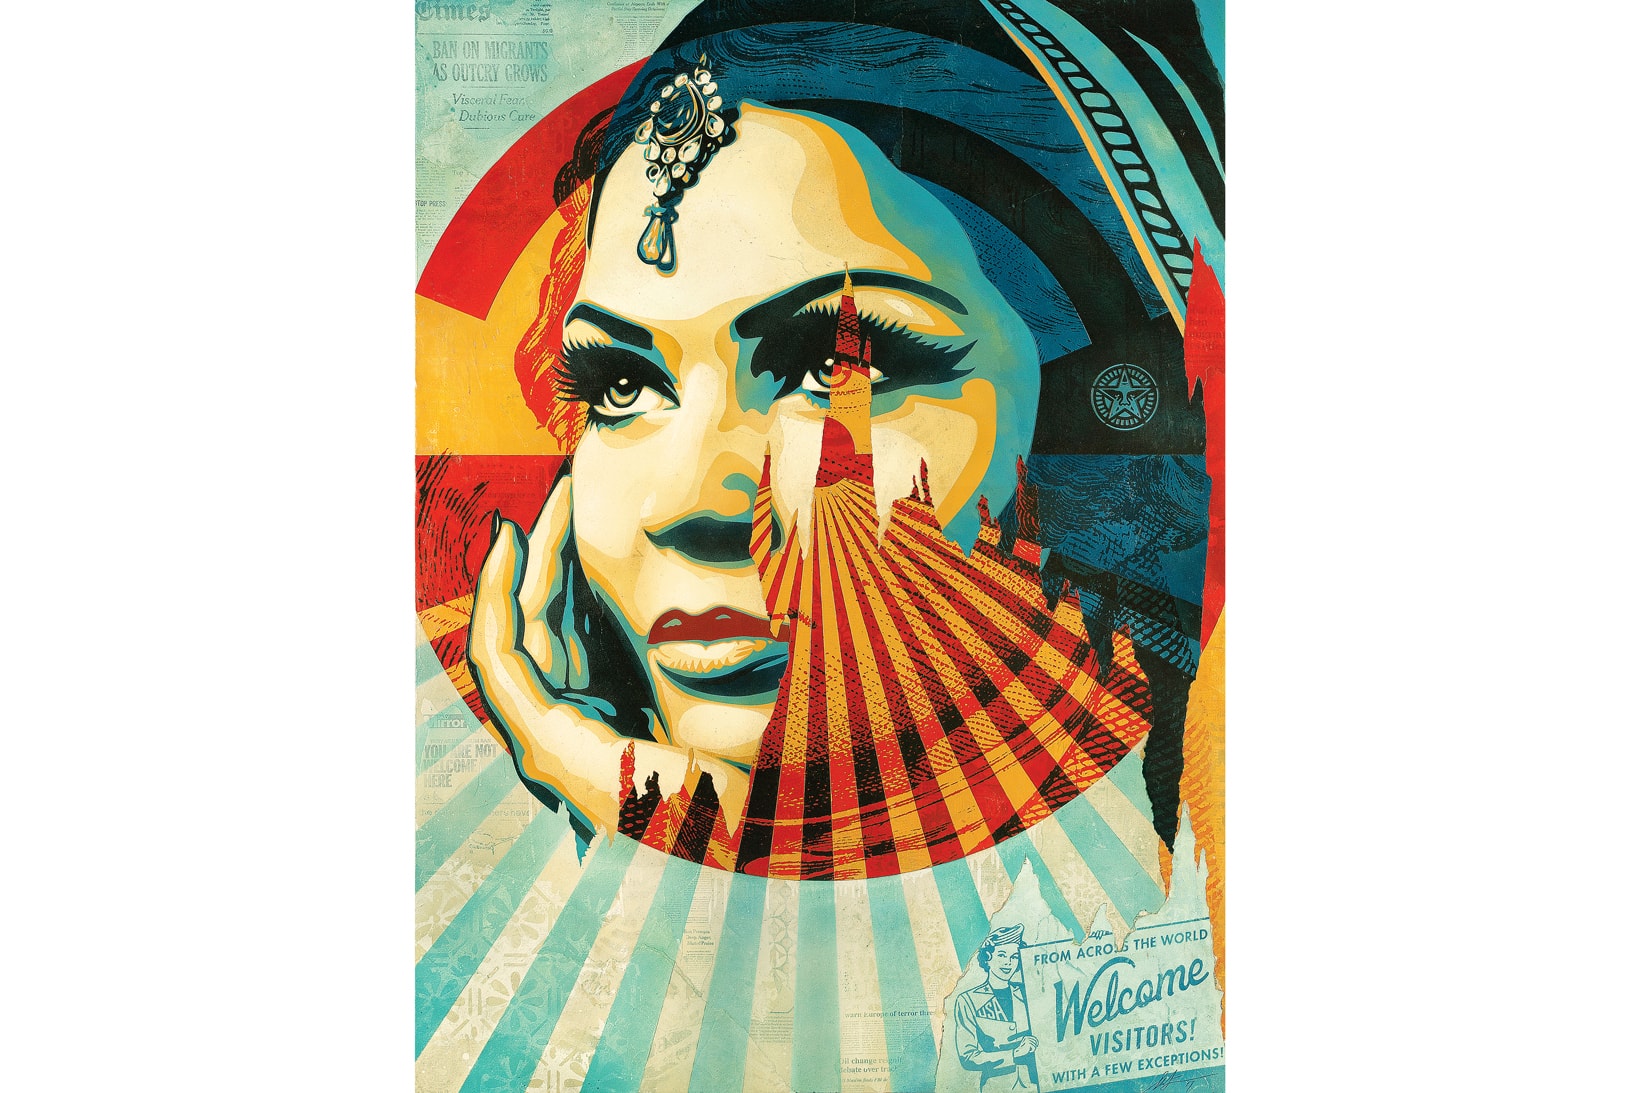 Shepard Fairey Obey Giant Library Street Collective Los Angeles California Art Artwork Exhibit Painting Print Installation